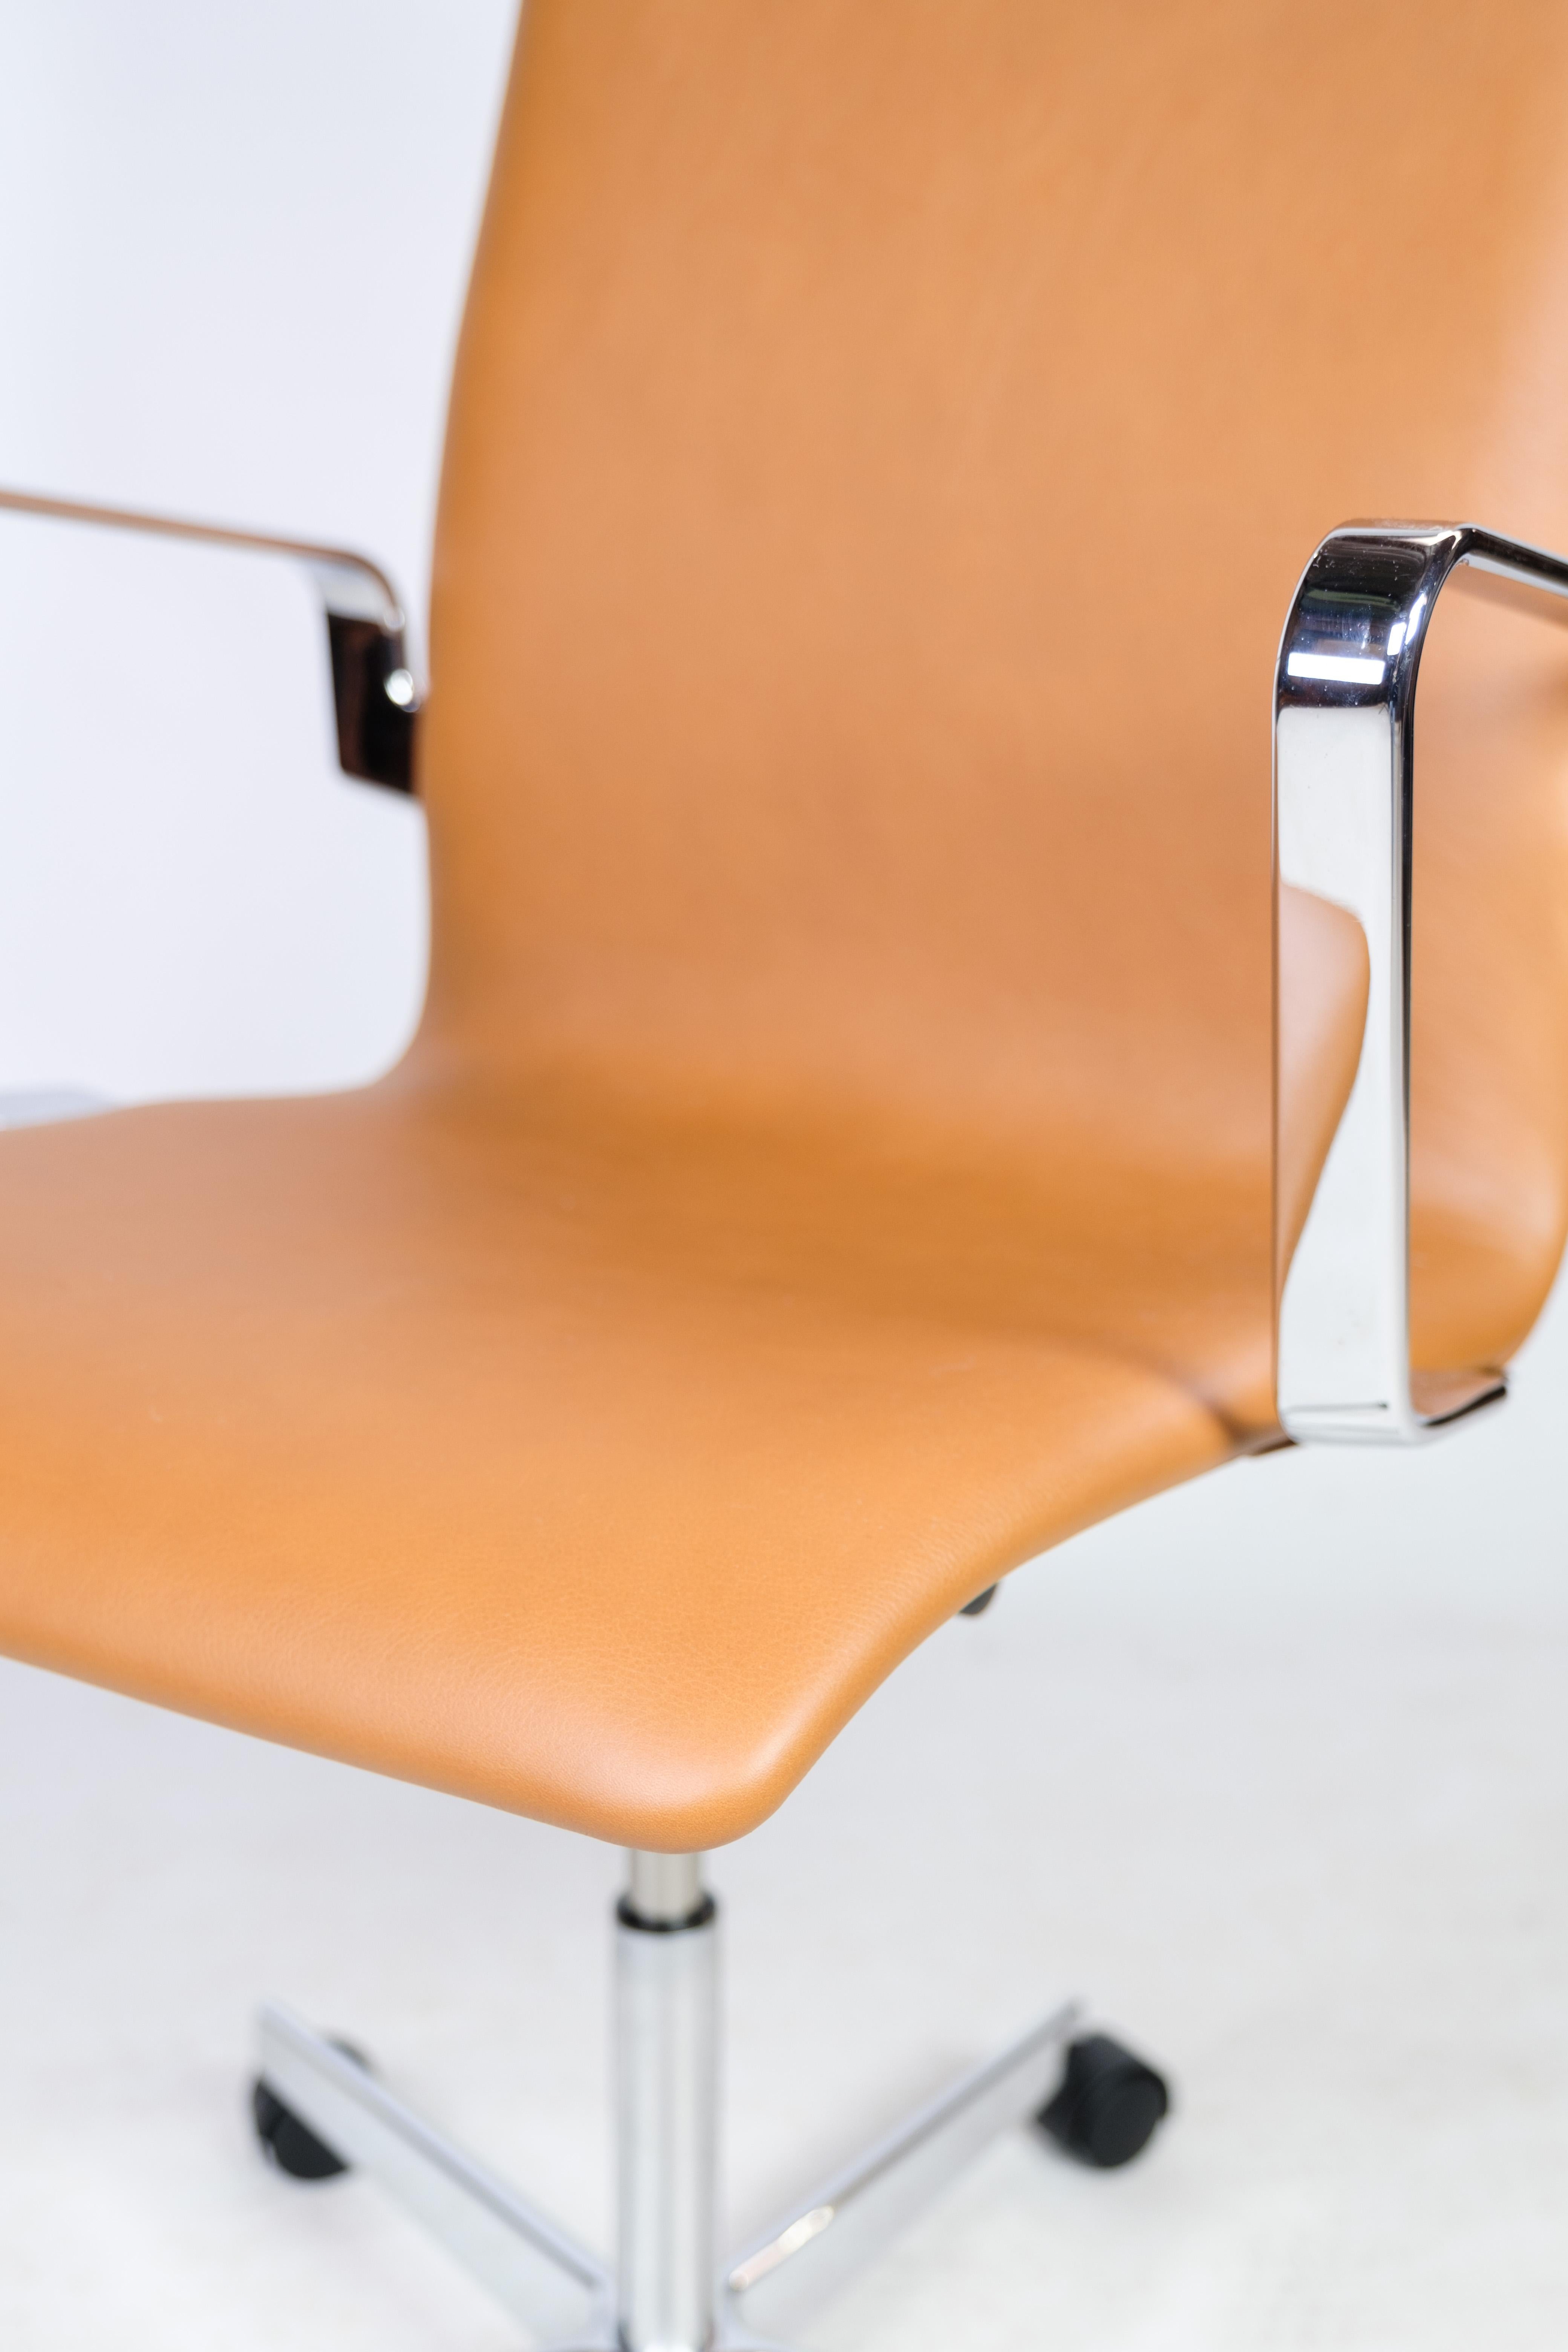 Oxford Classic Office Chair, Model 3293C, Cognac Leather, Arne Jacobsen, 1963 For Sale 2